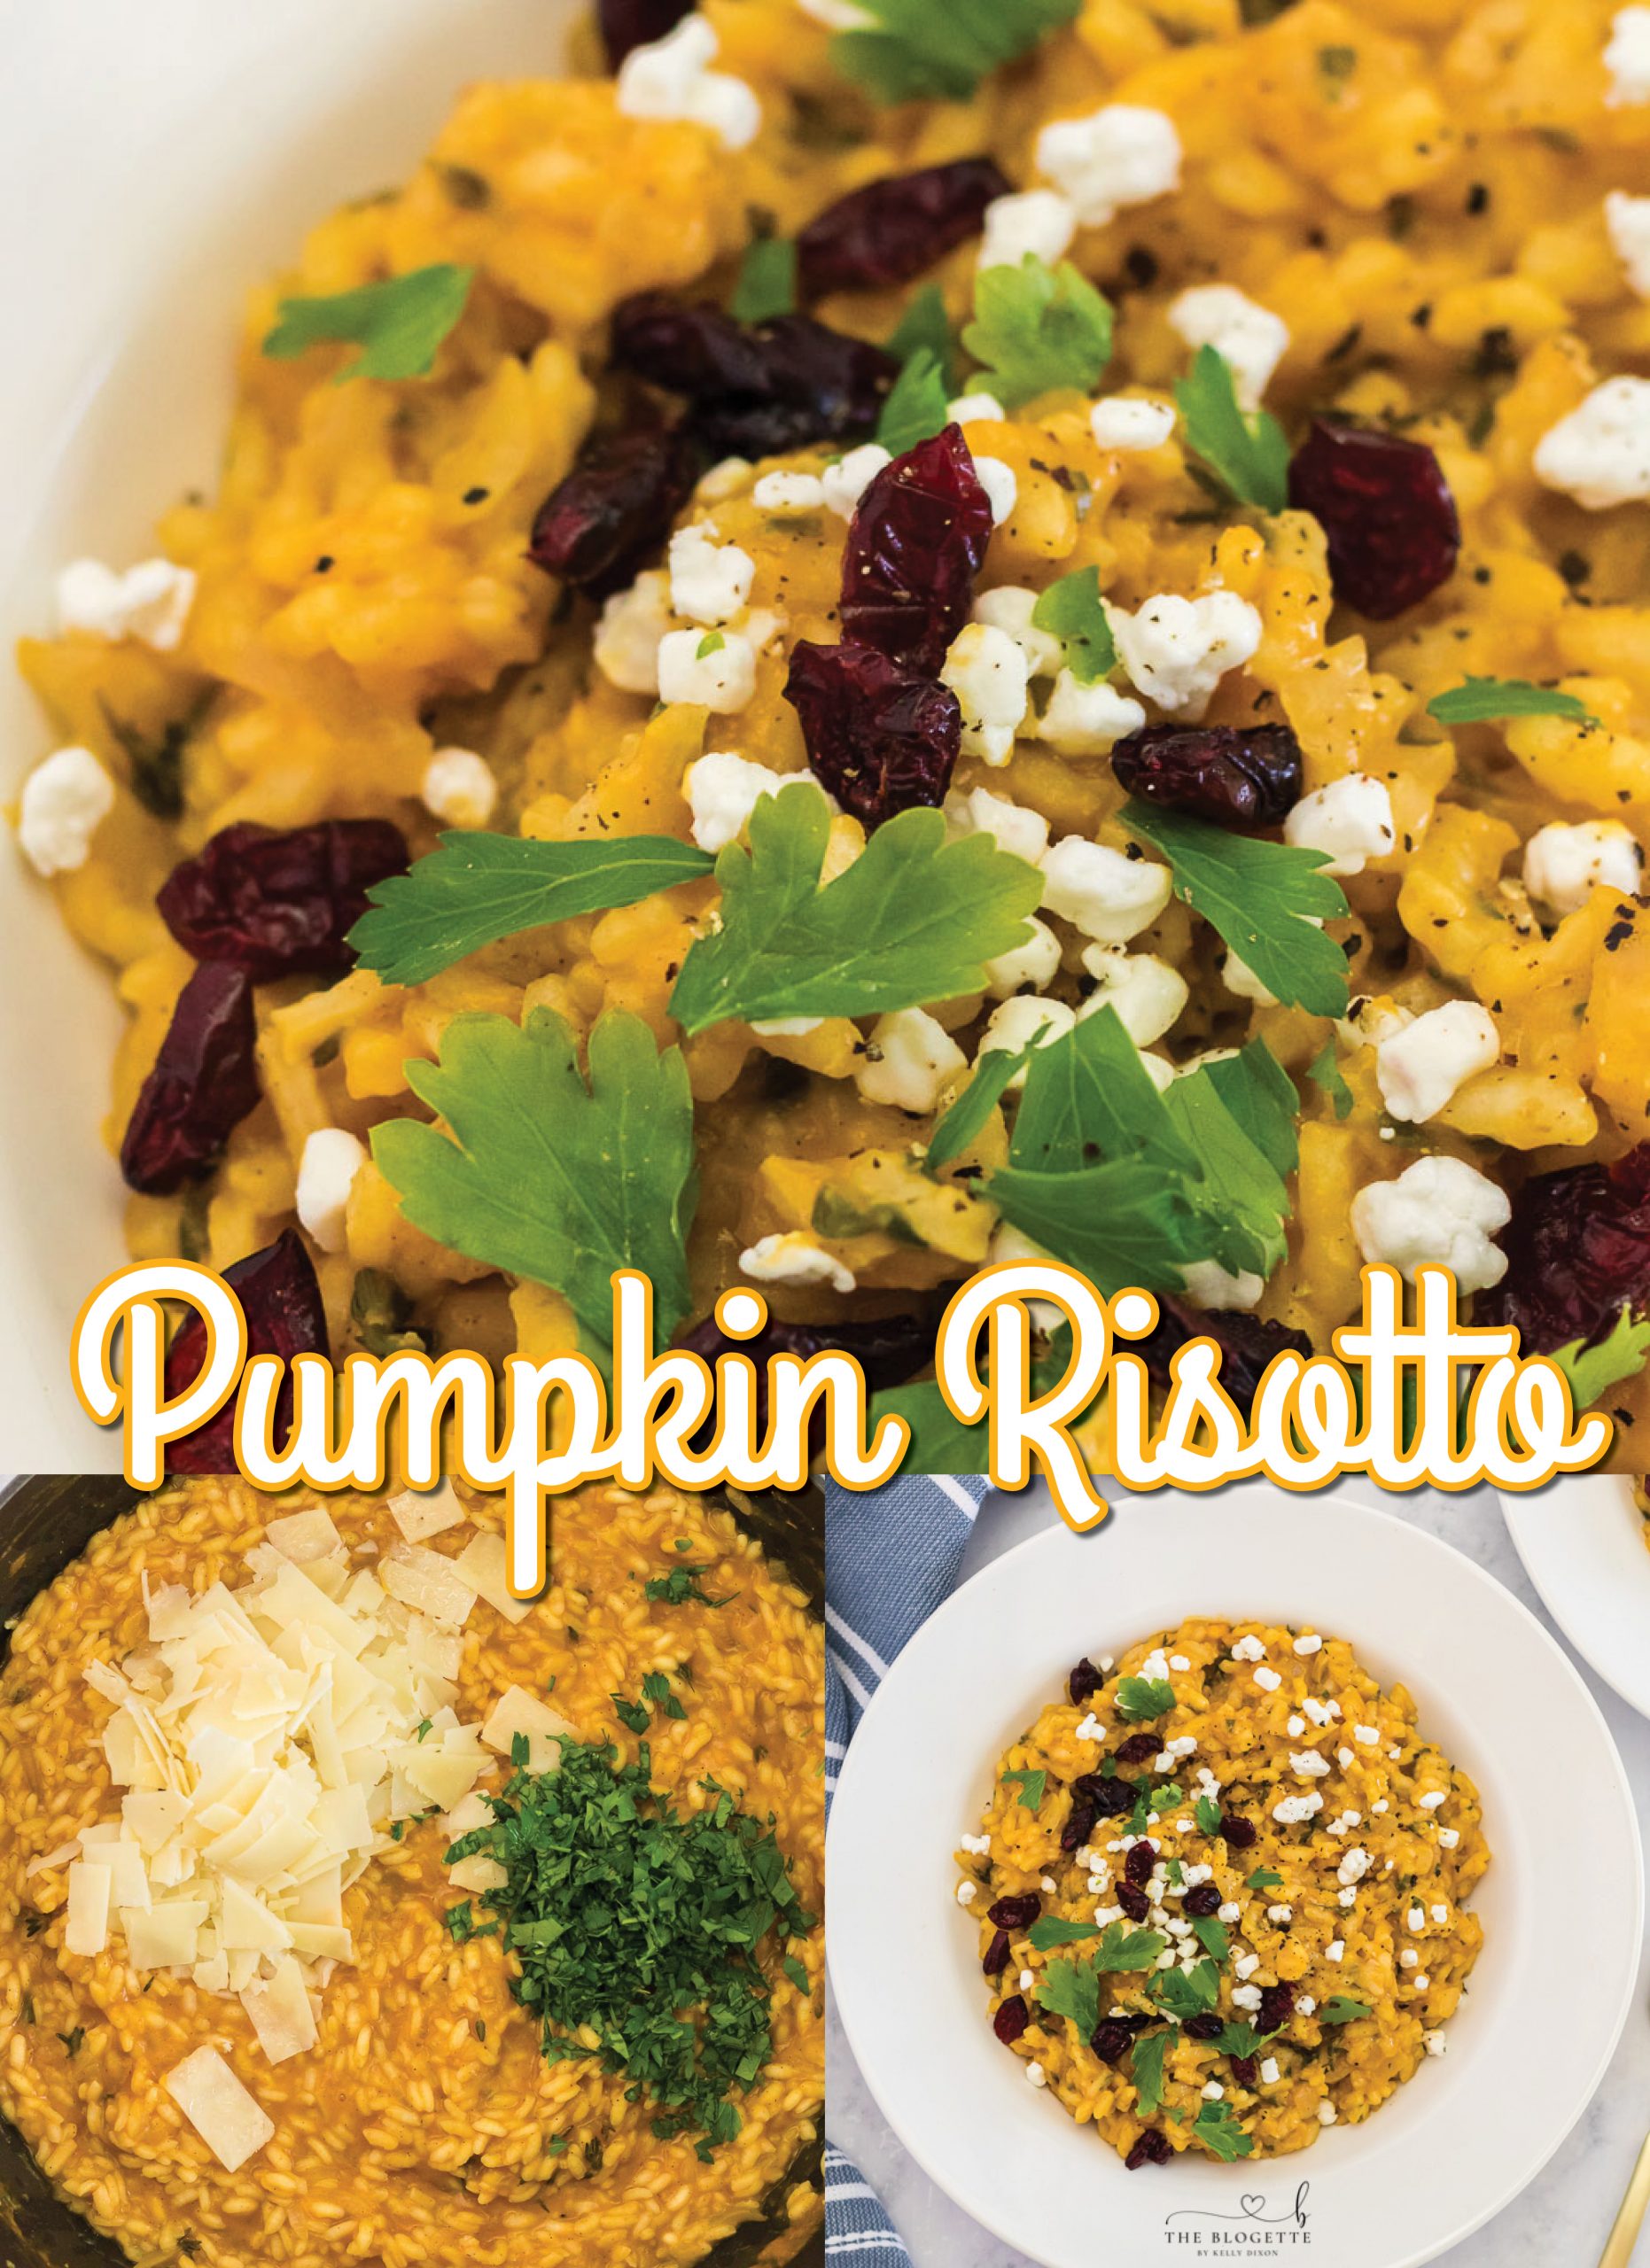 Pumpkin Risotto is such a deliciously comforting fall and winter meal! While it looks elegant enough for Halloween, Thanksgiving, and Christmas, it is perfect for a weeknight dinner as well.